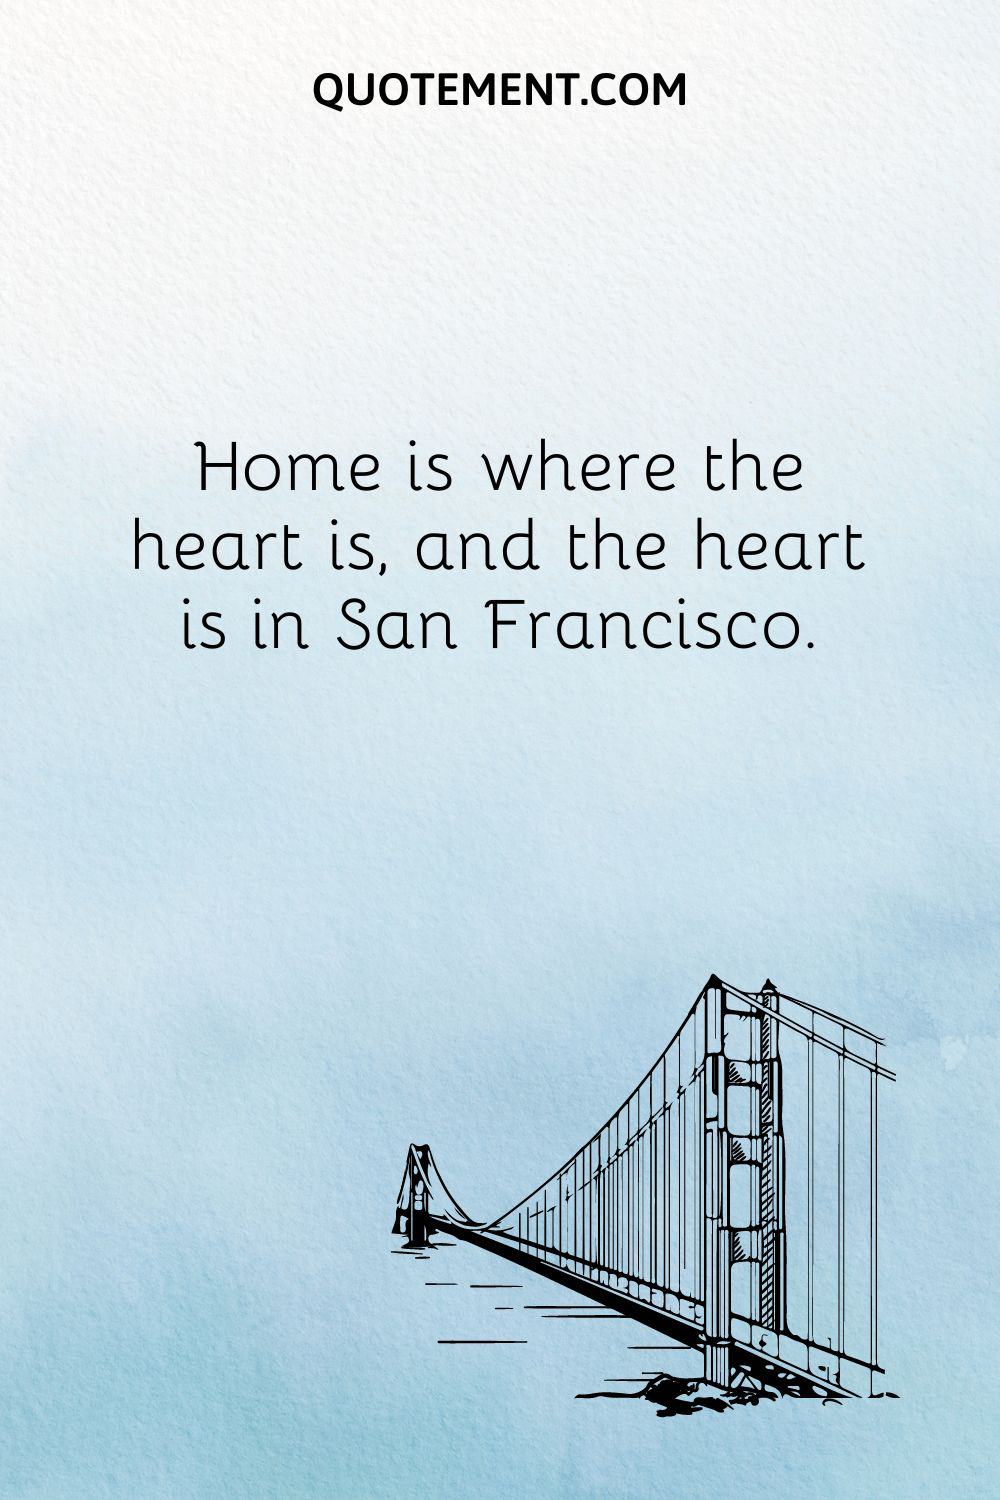 Home is where the heart is, and the heart is in San Francisco.